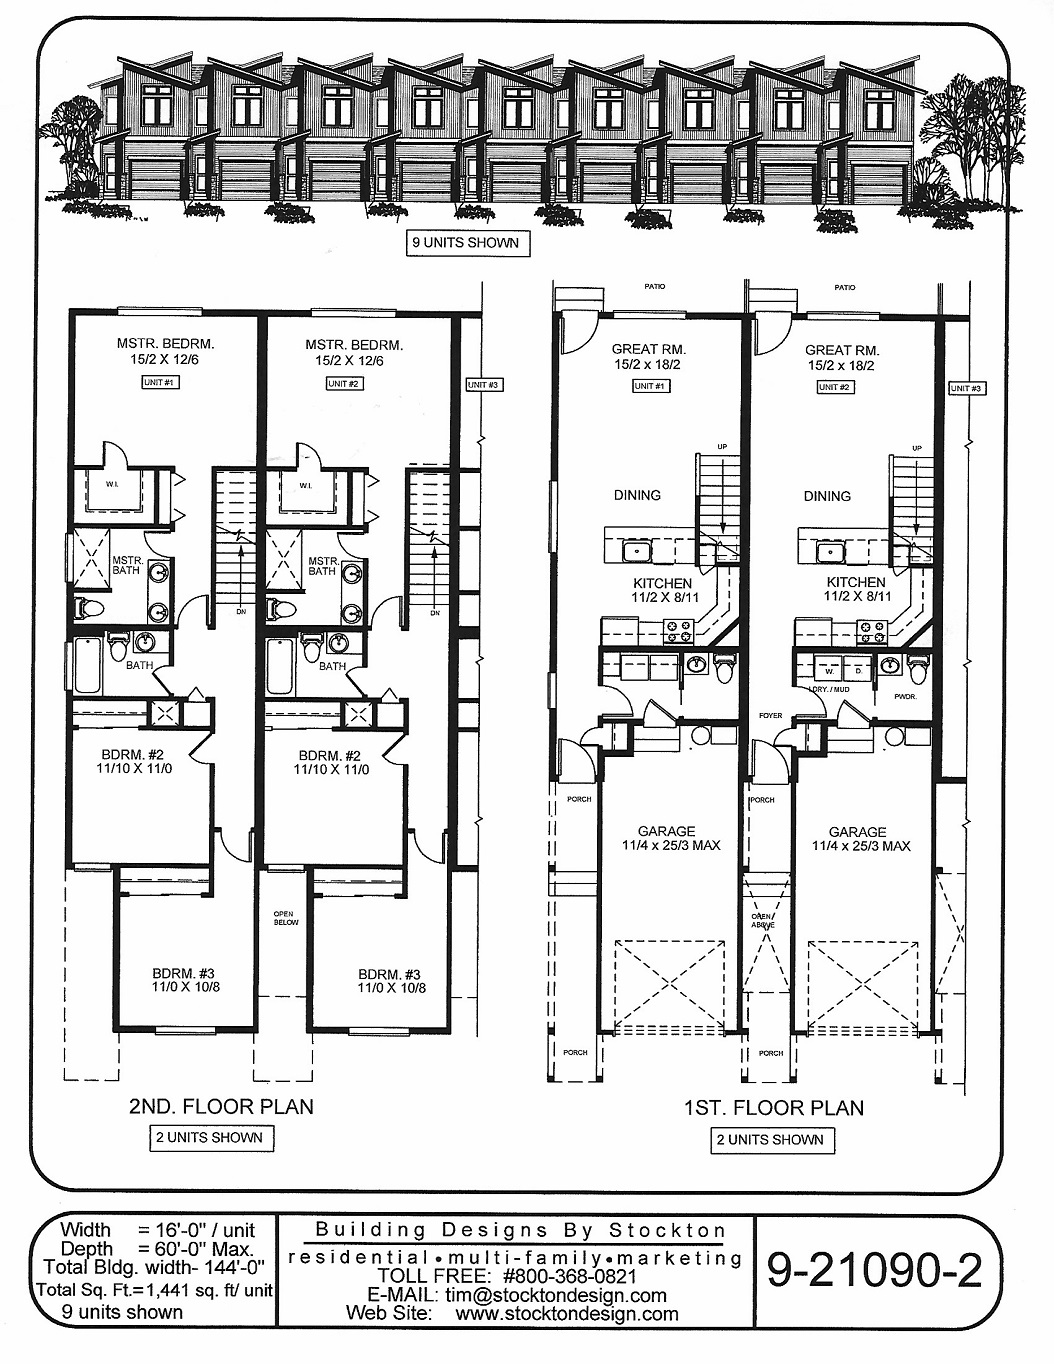 Multi Family Home And Building Plans, Multi Residential House Plans